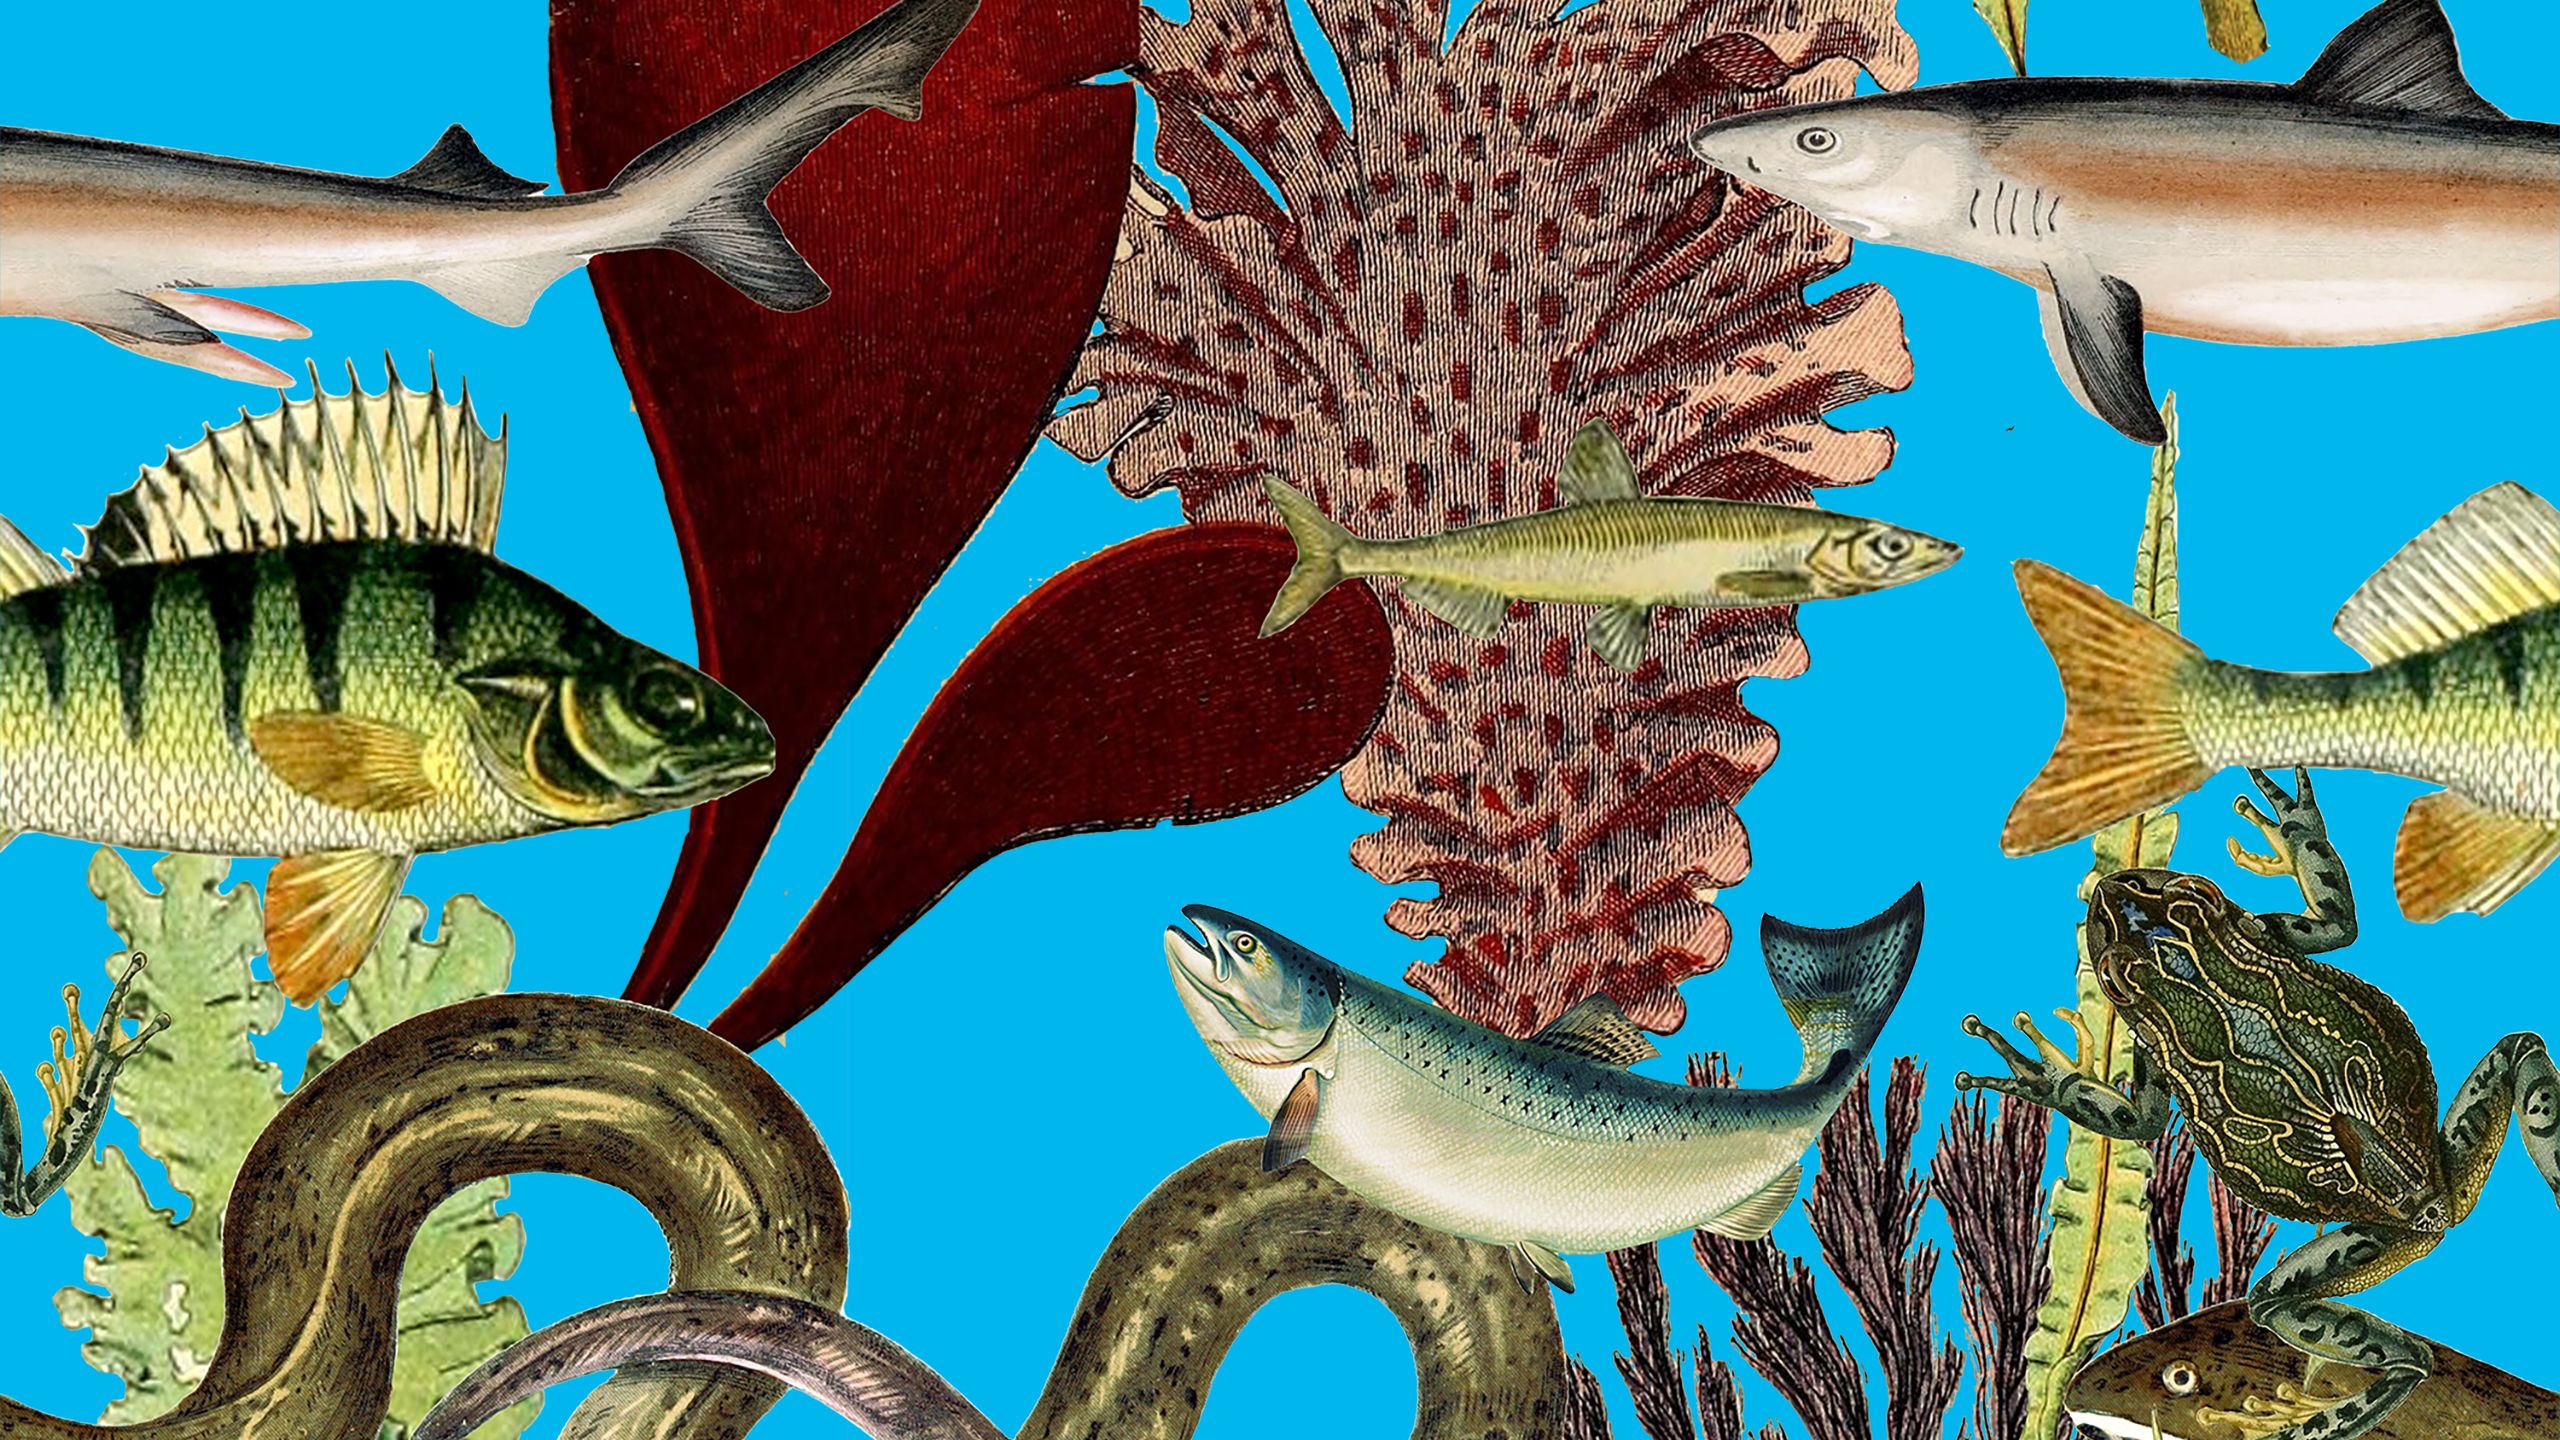 Illustrations of fish, frogs, snakes and other sea creature and plants collaged over a bright blue background